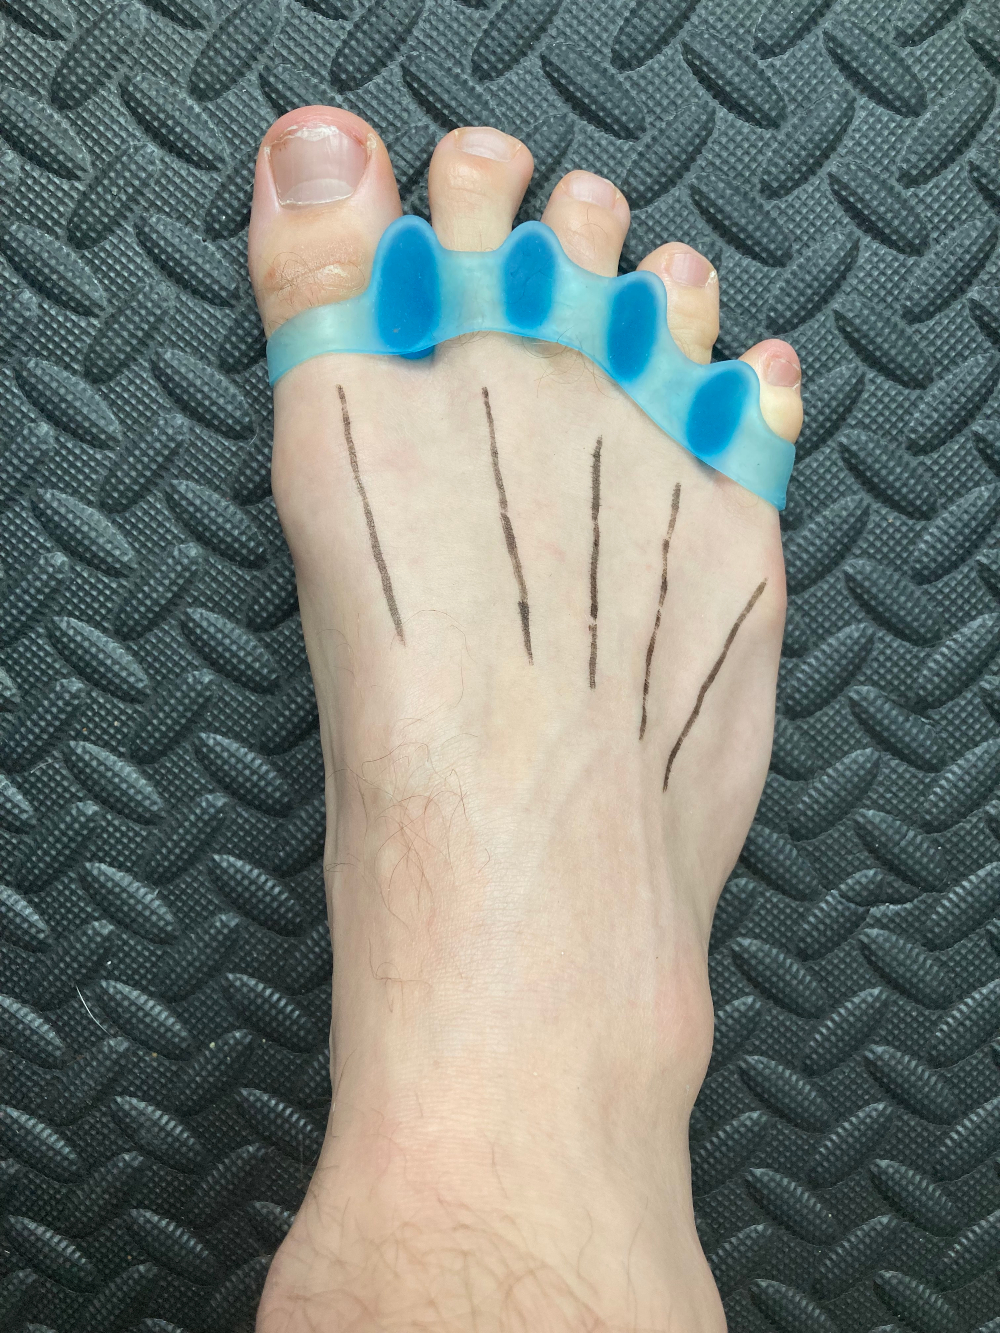 Working on my toe alignment. Anyone else have experience with